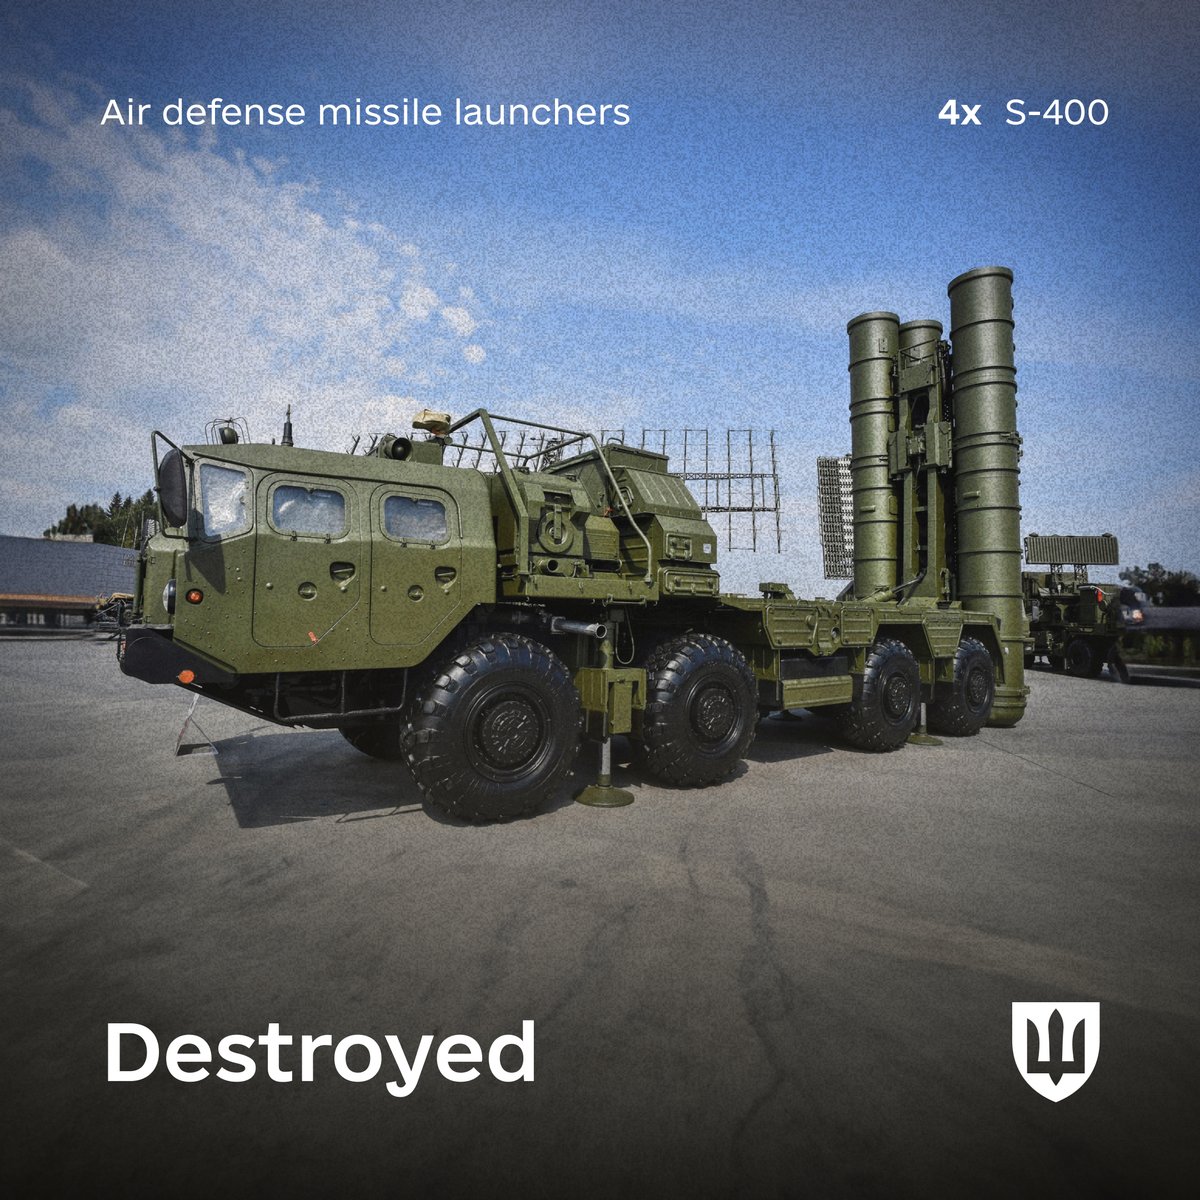 On April 17, 2024, as a result of a successful operation by the Armed Forces of Ukraine at the military airfield in Dzhankoi in Crimea, the following russian targets were destroyed or critically damaged: ● 4x S-400 air defense missile launchers ● 3x radar detection systems ●